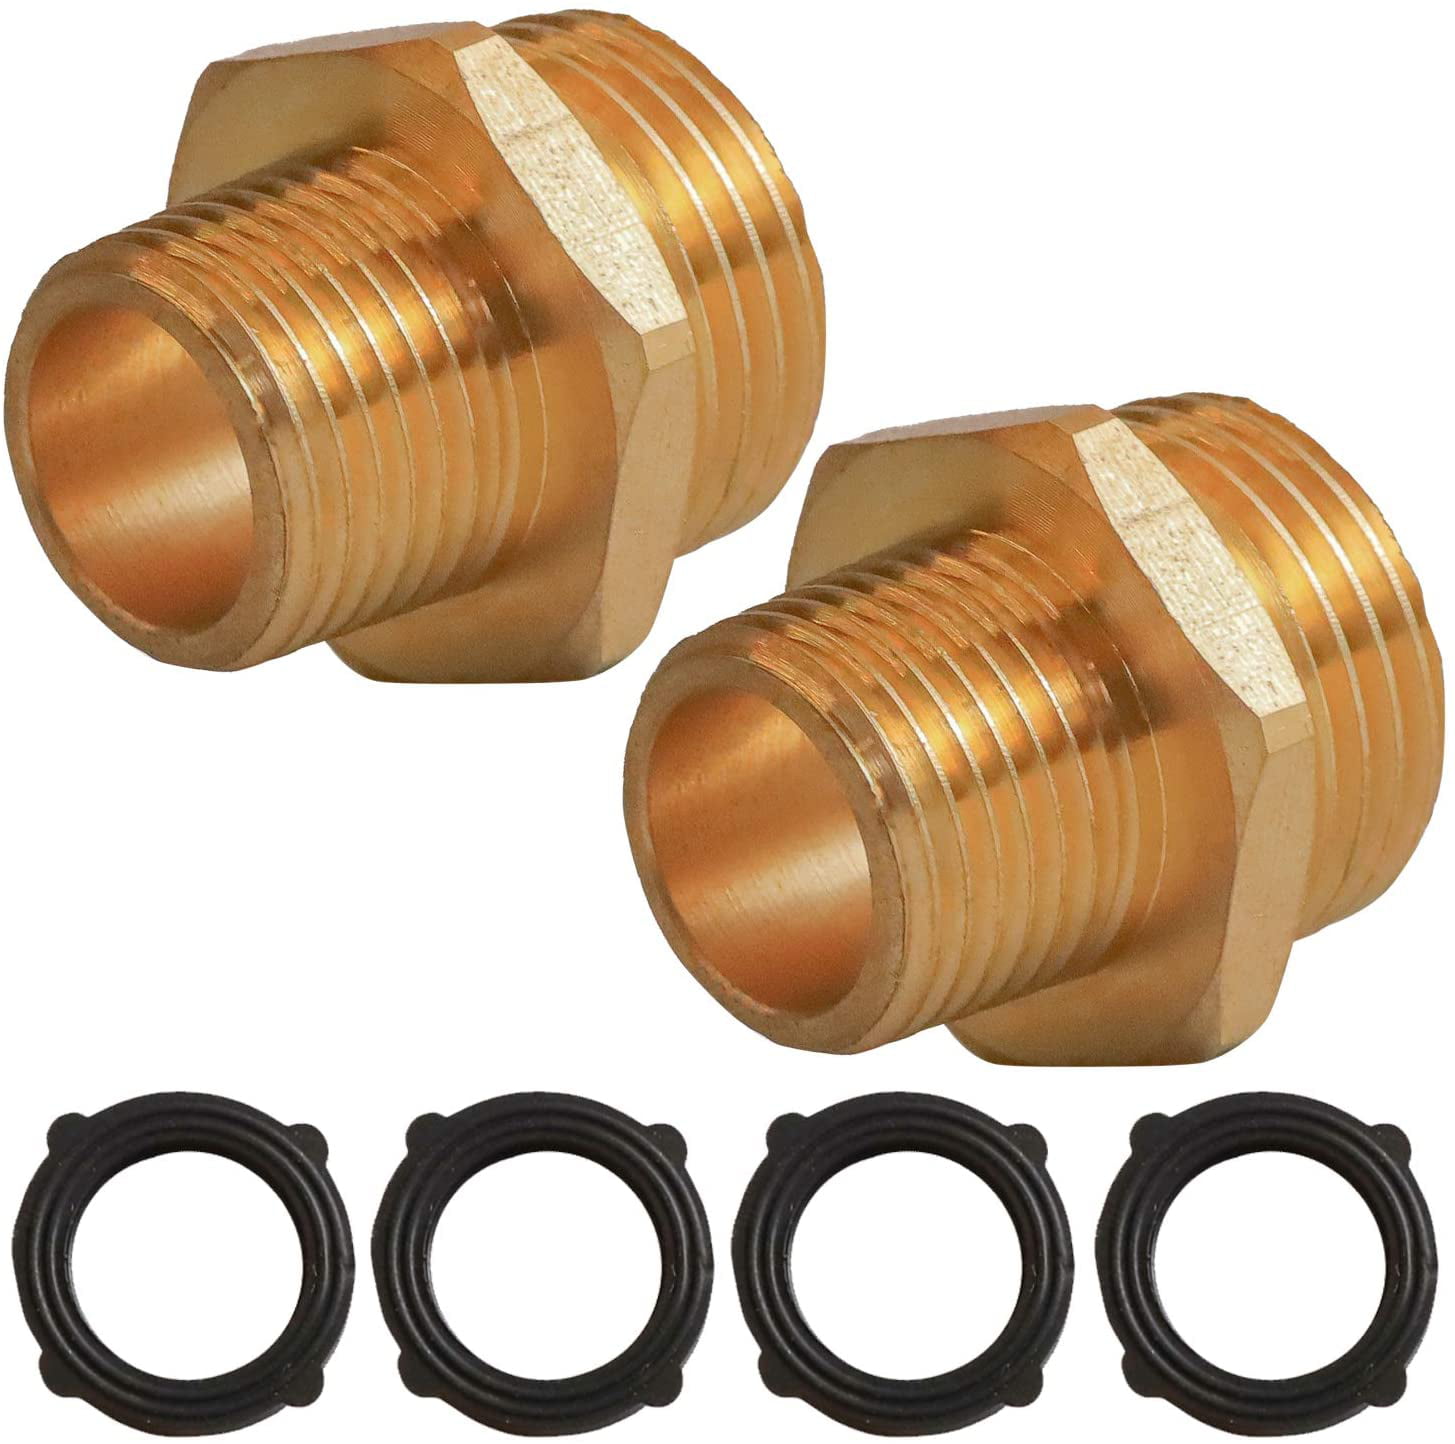 Brass Fitting, 3/4" GHT Female X 1/2" NPT Male Connector Garden Hose Adapter 